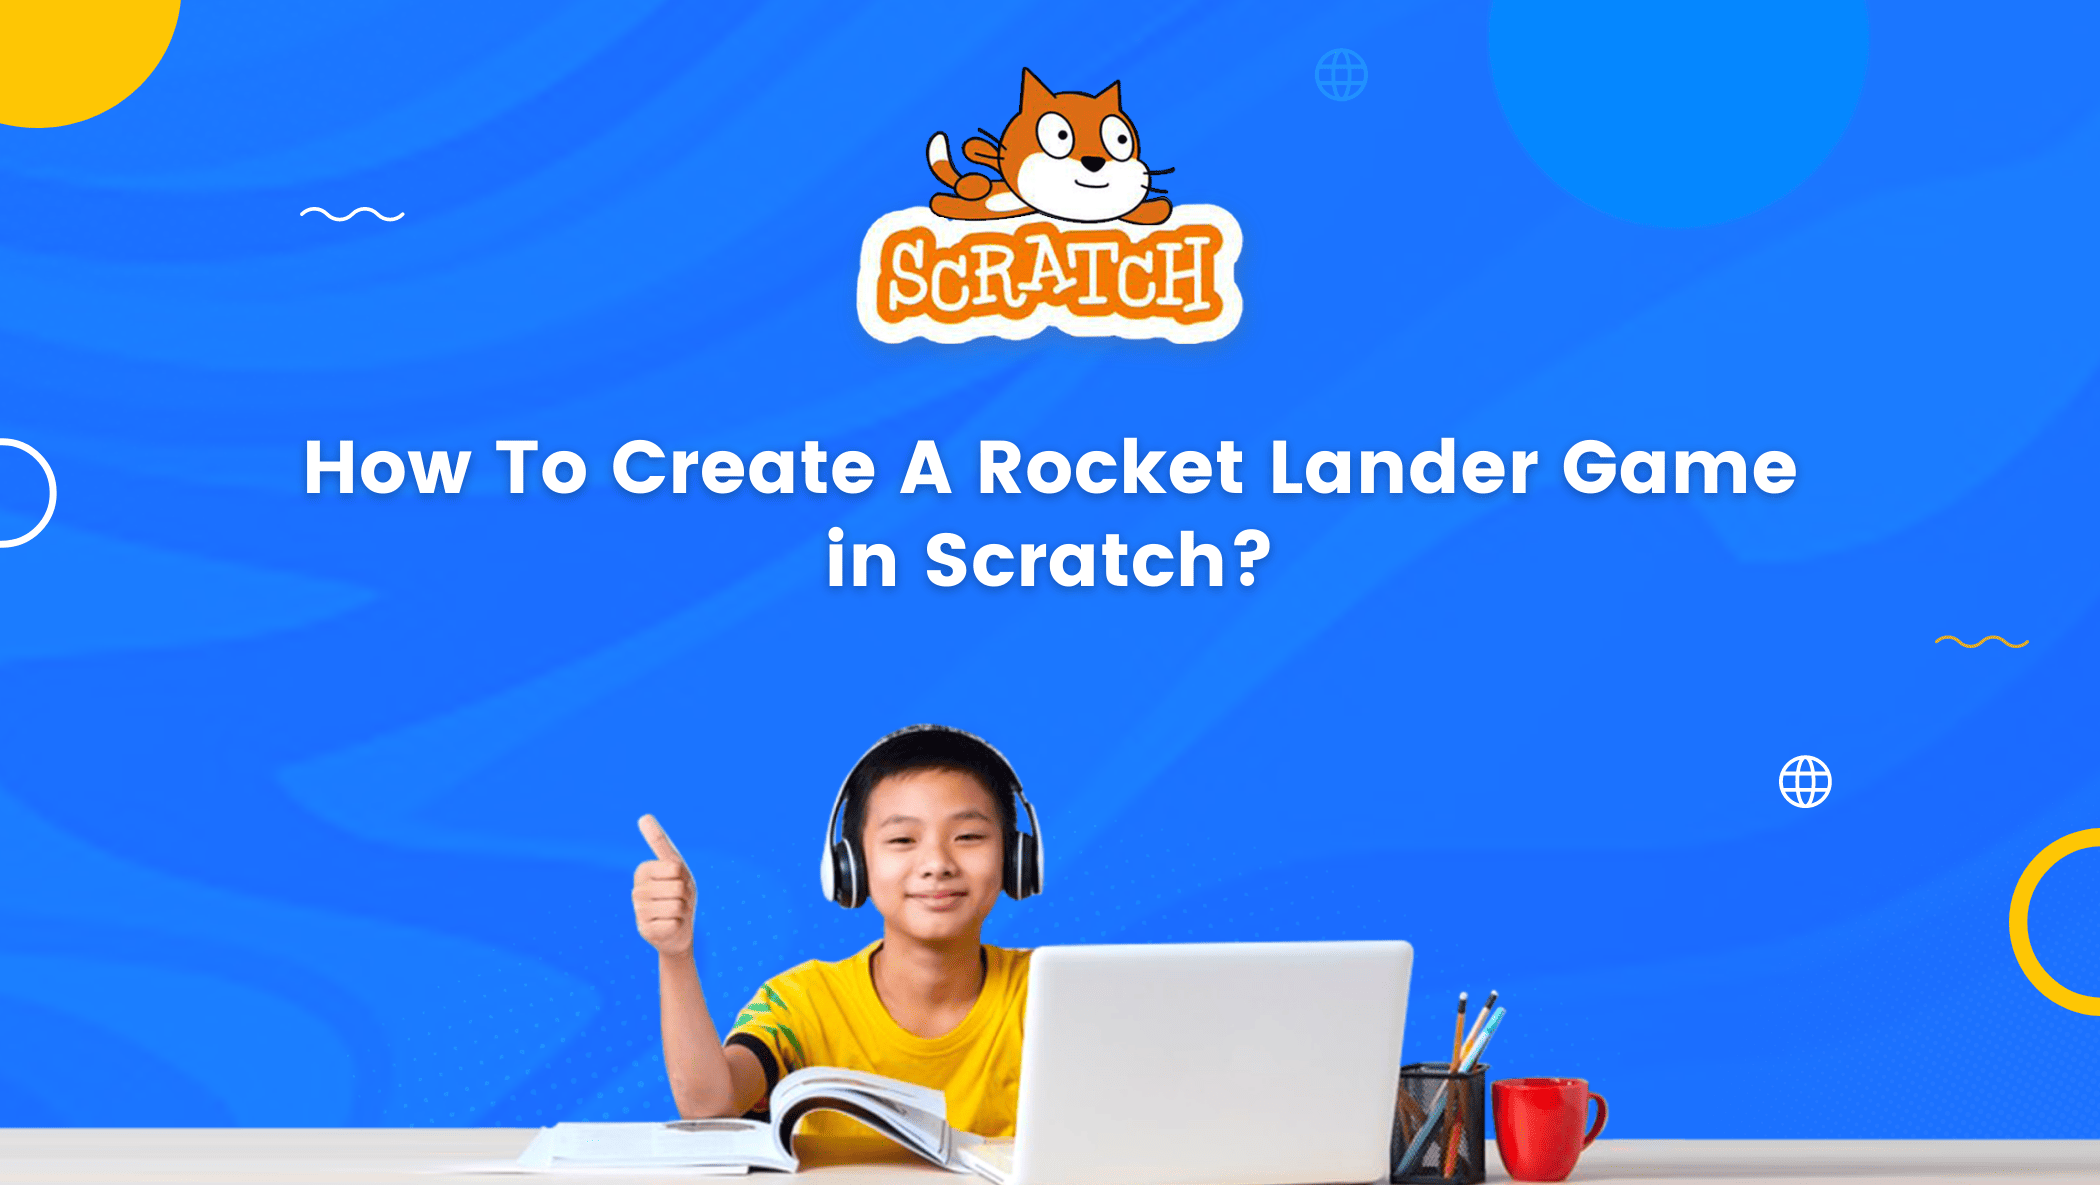 How To Create A Rocket Lander Game in Scratch